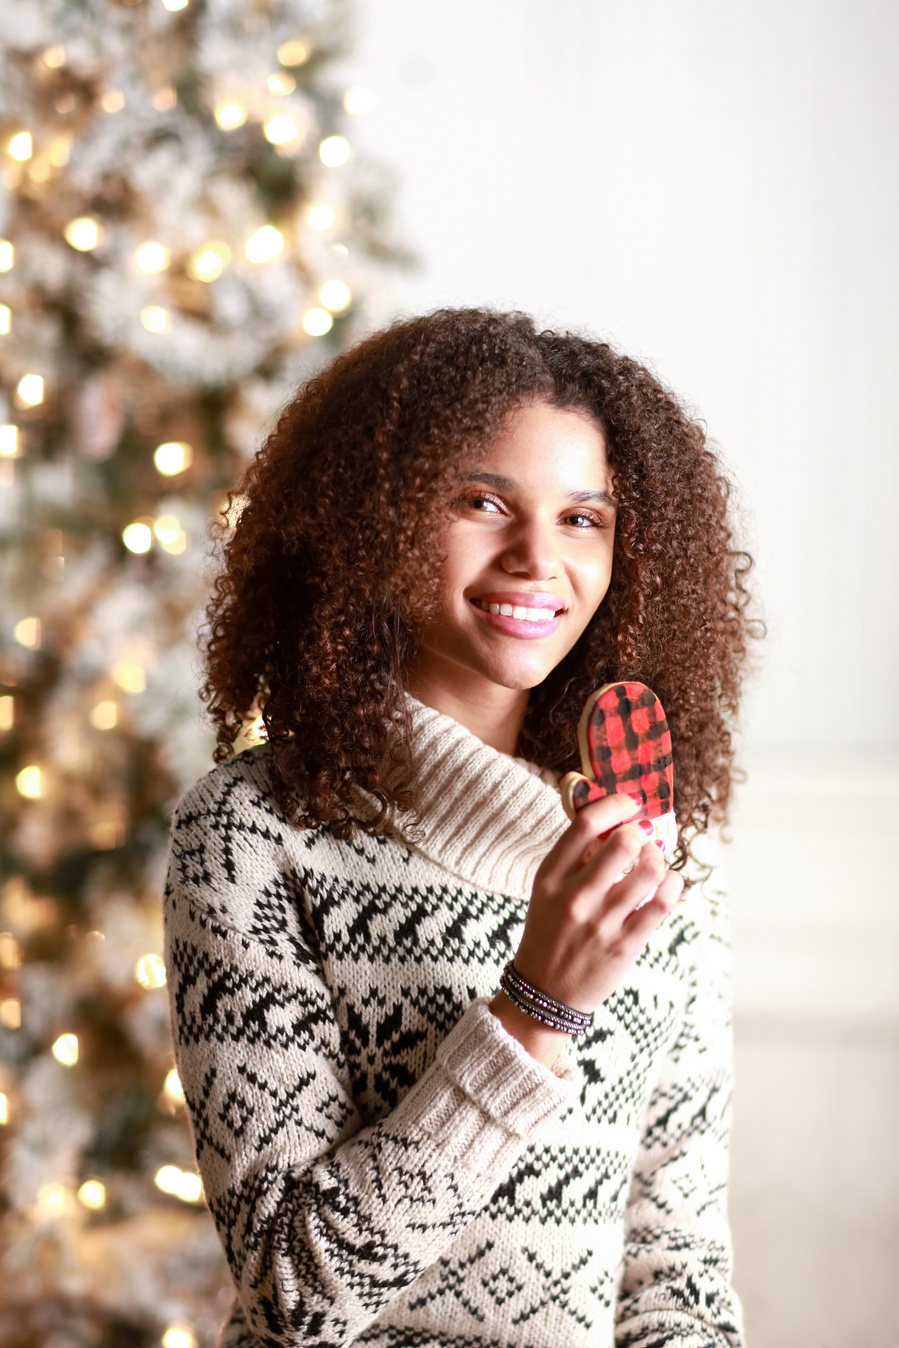 Model with curly brown hair in a striped white and black faire isle sweater with a cowl neck sitting in front of a Christmas tree and holding a buffalo plaid mitten cookie as if to eat it. Part of a brand photography campaign for Maurices